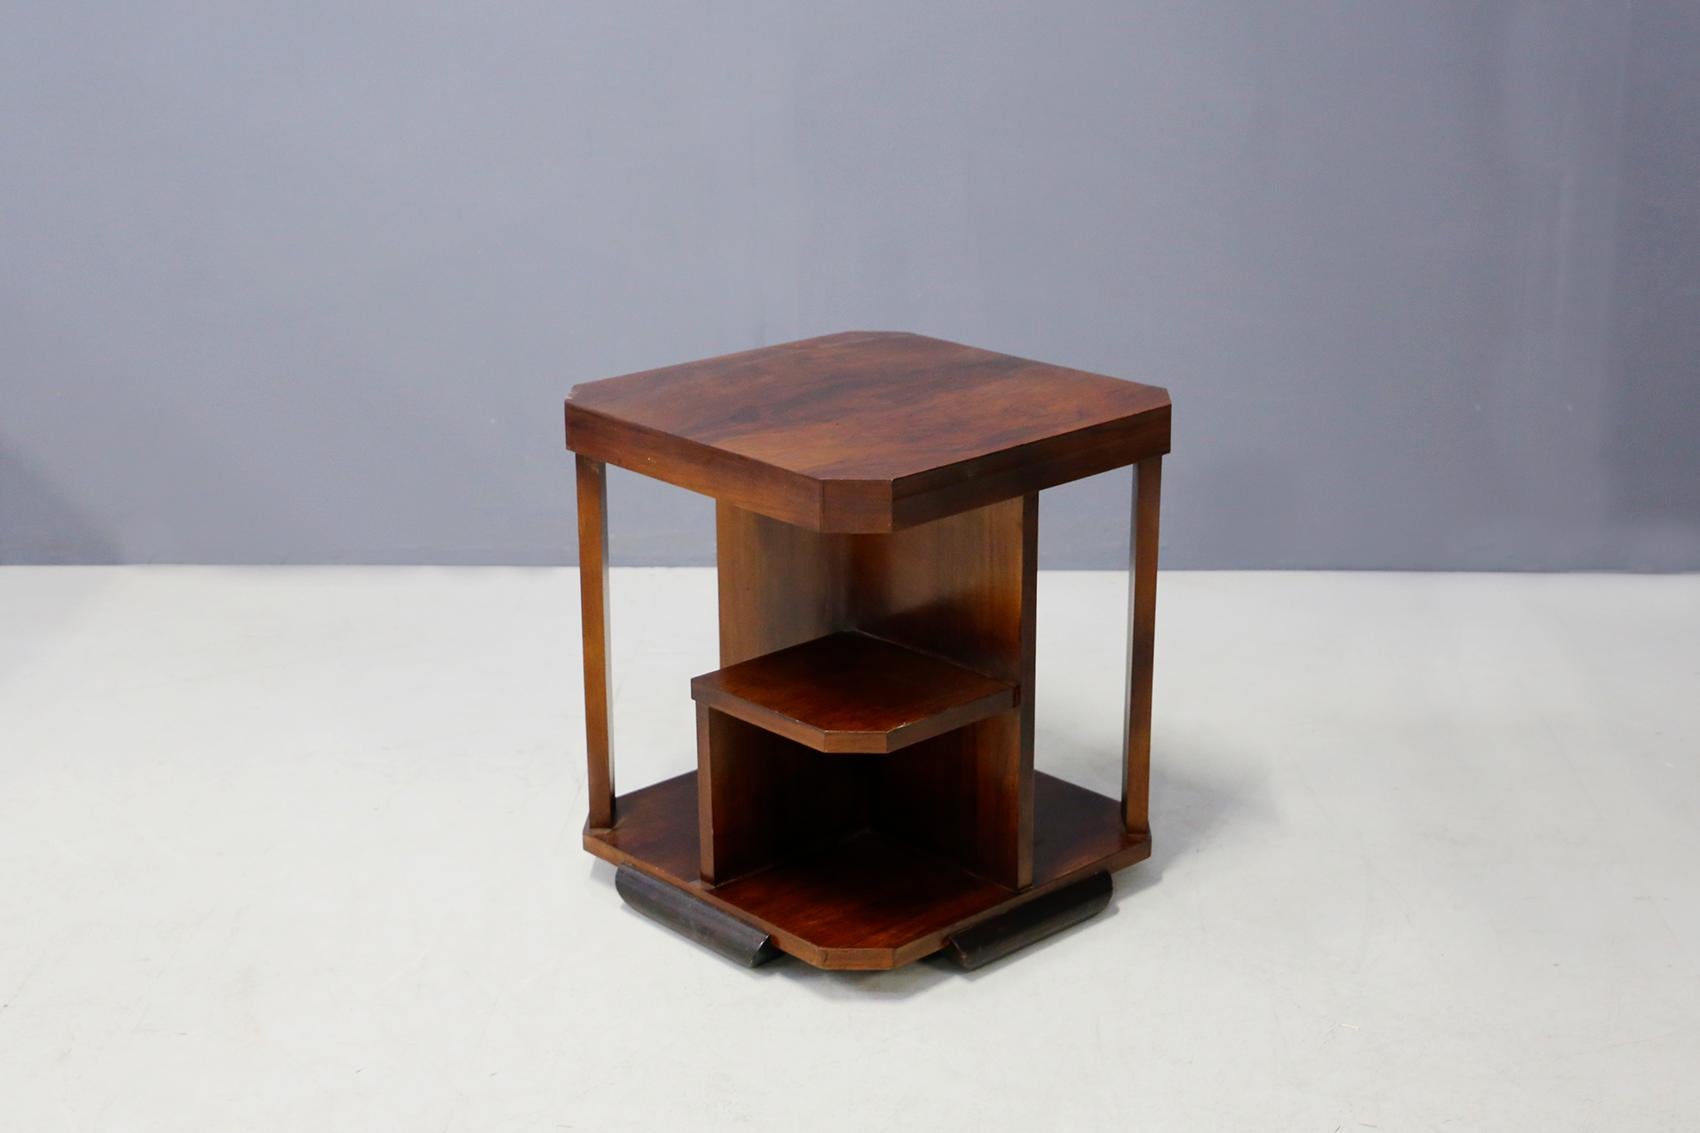 Table from the 1930s. The coffee table is attributed to the great designer Gio Ponti. Its realization is in a beautiful walnut wood. Made with several compartments, the coffee table allows a great functionality. Its very Classic and linear lines are